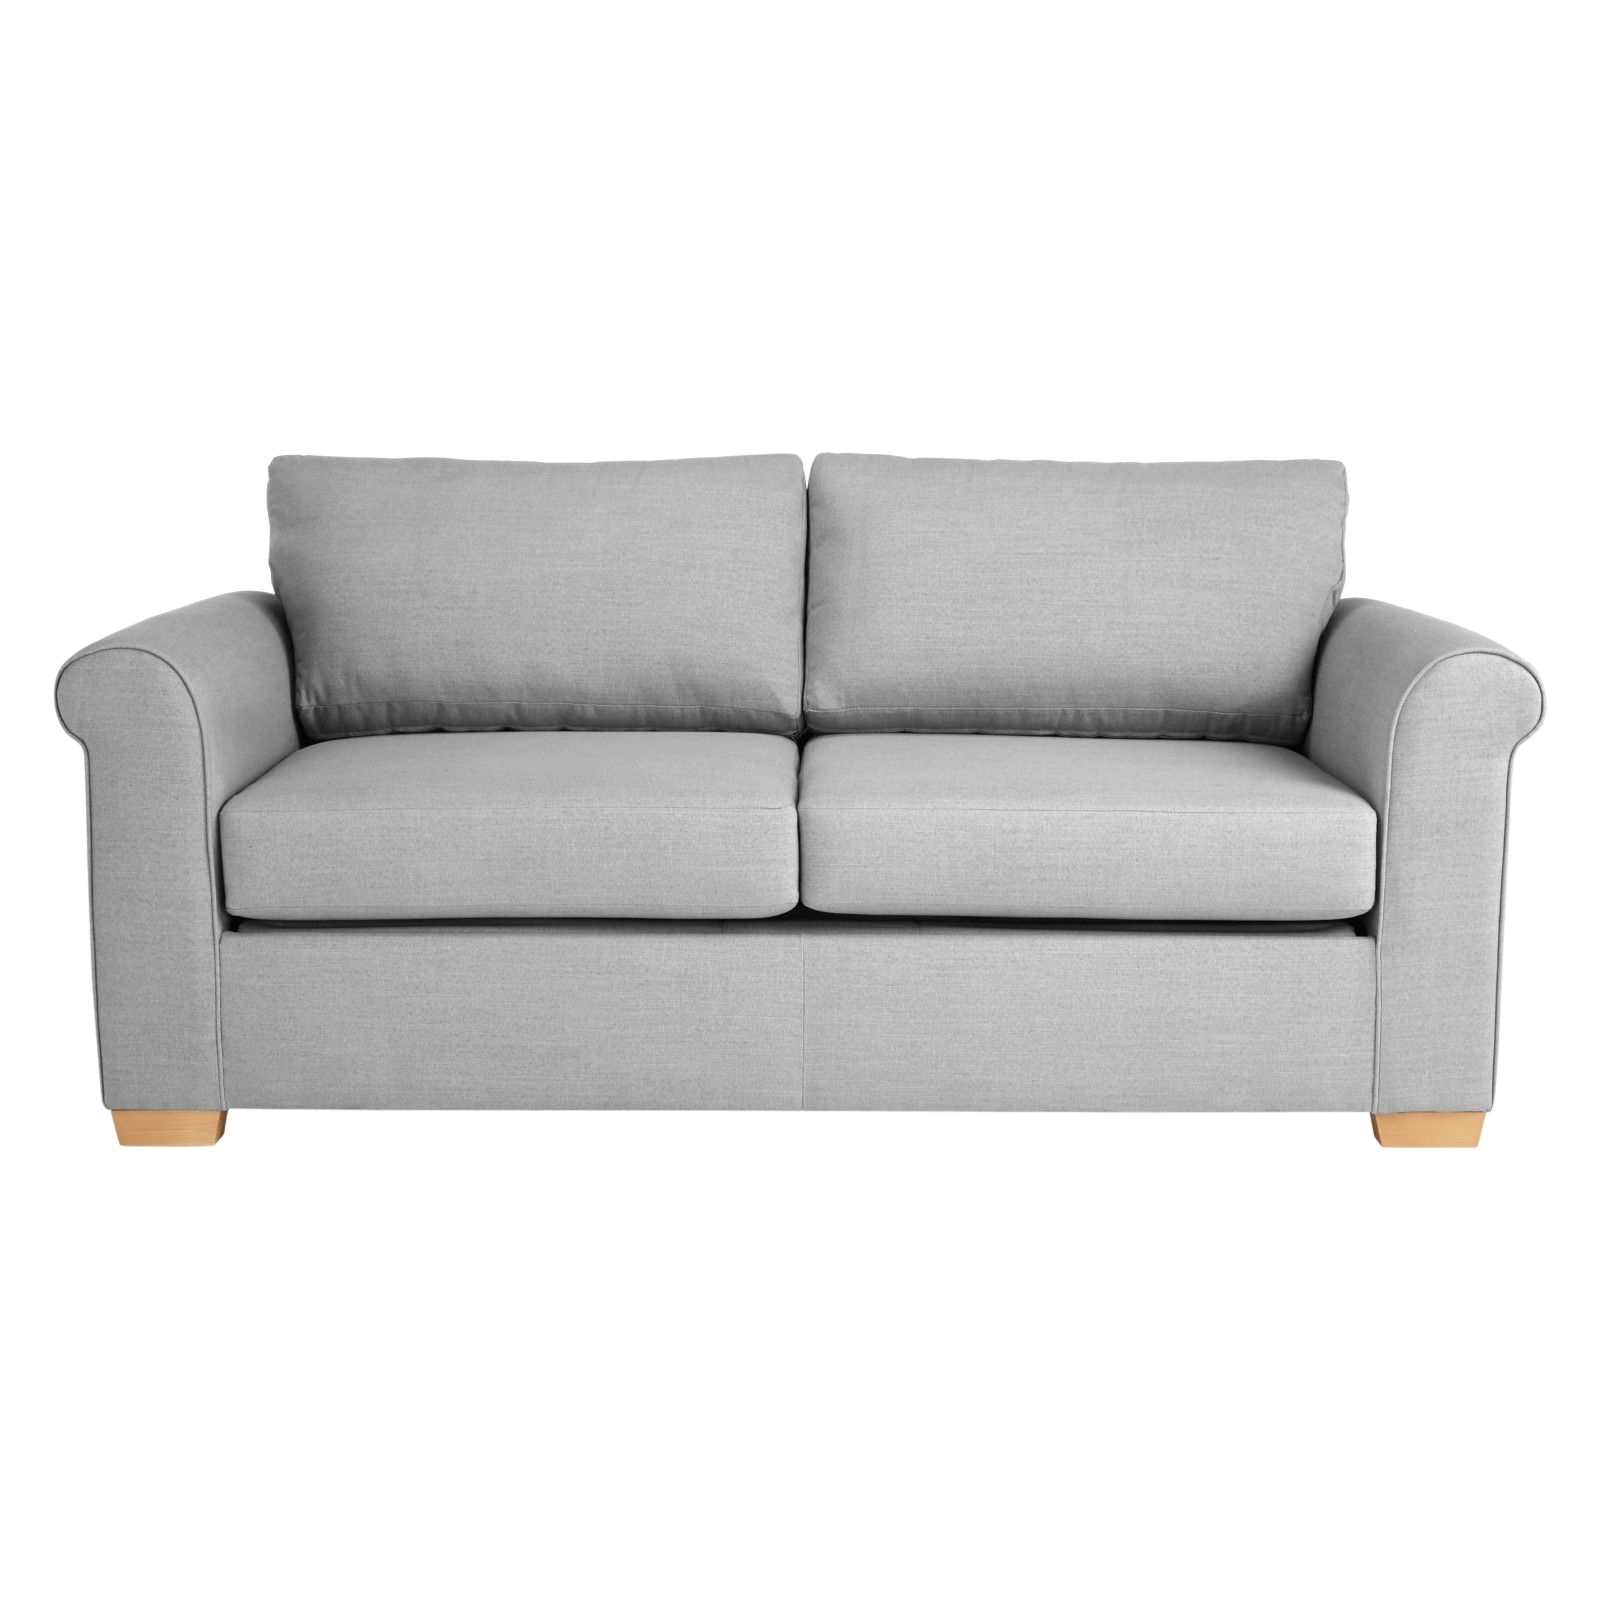 The Malone sofa bed range is a contemporary twist on a traditional scroll armed model